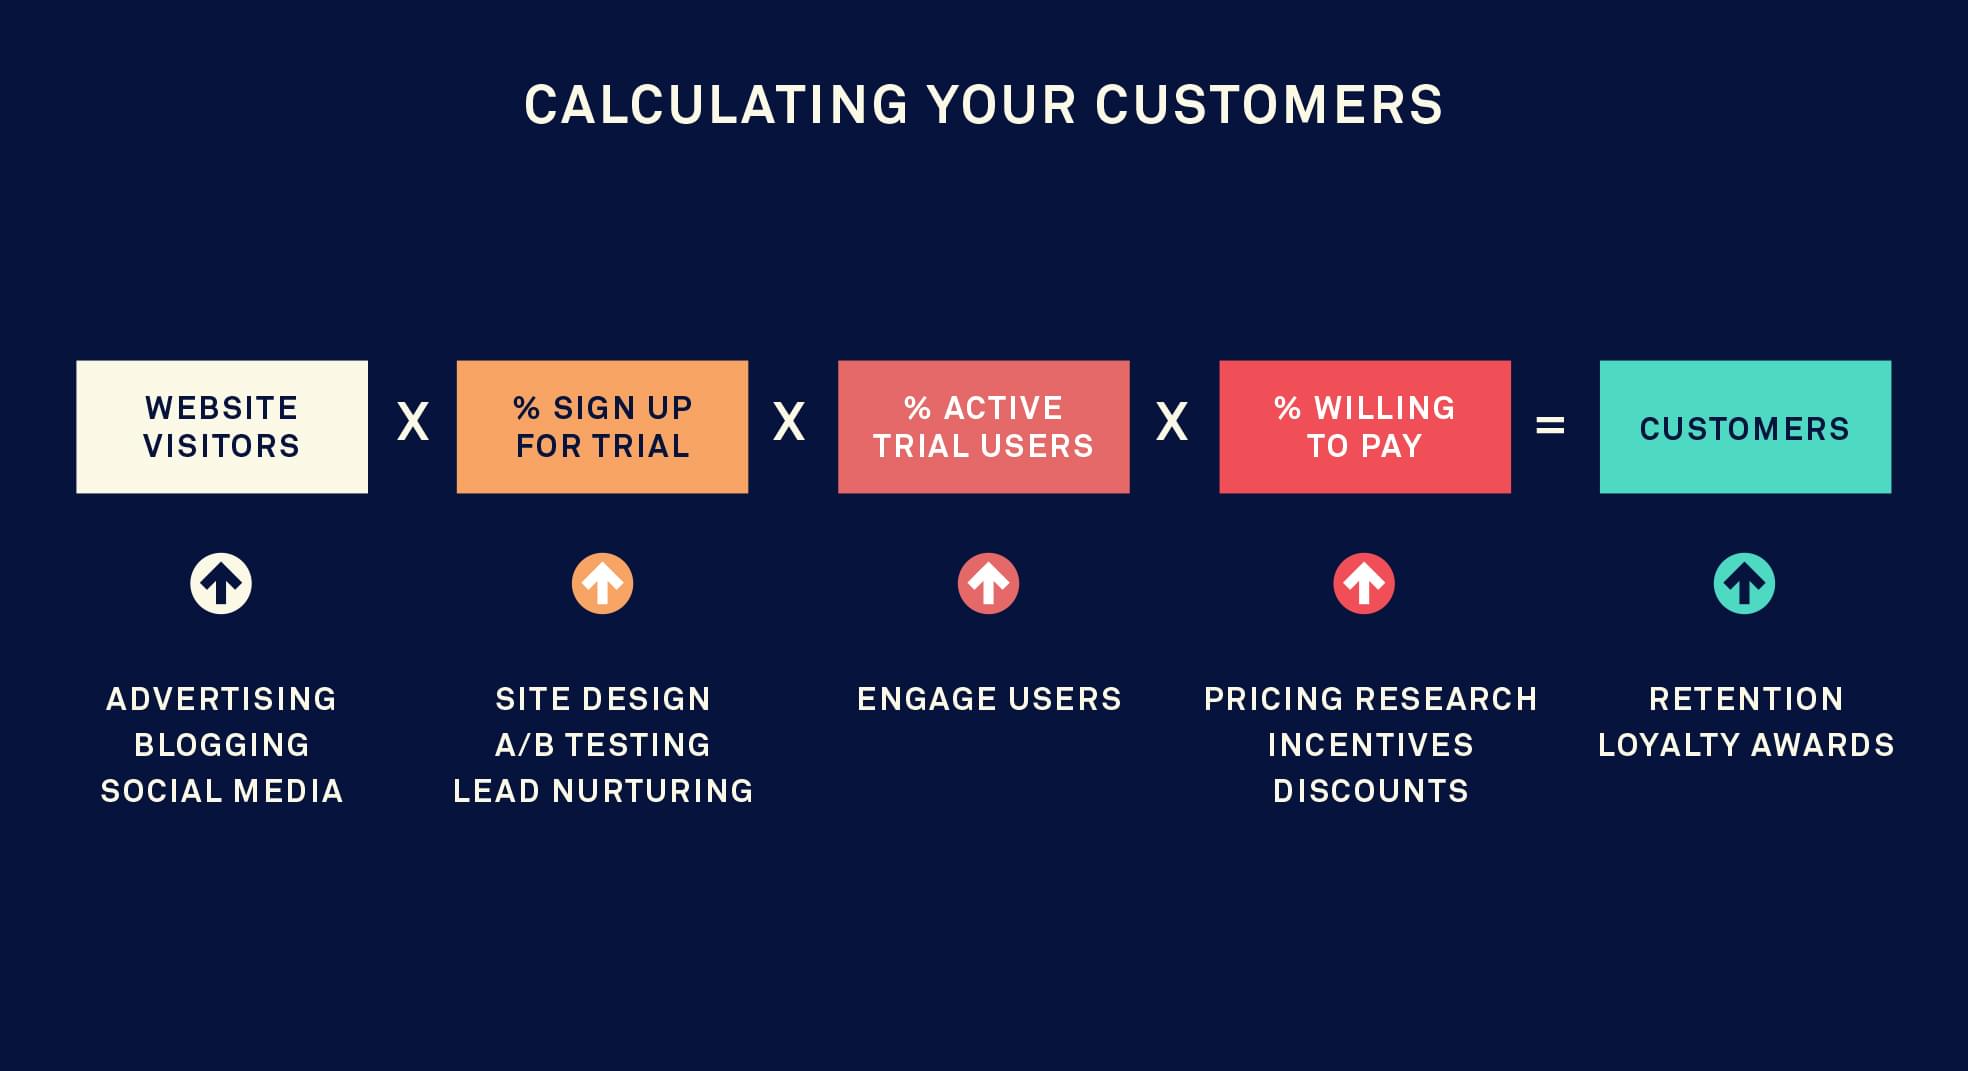 calculating engagement is vital to quantify your real customers